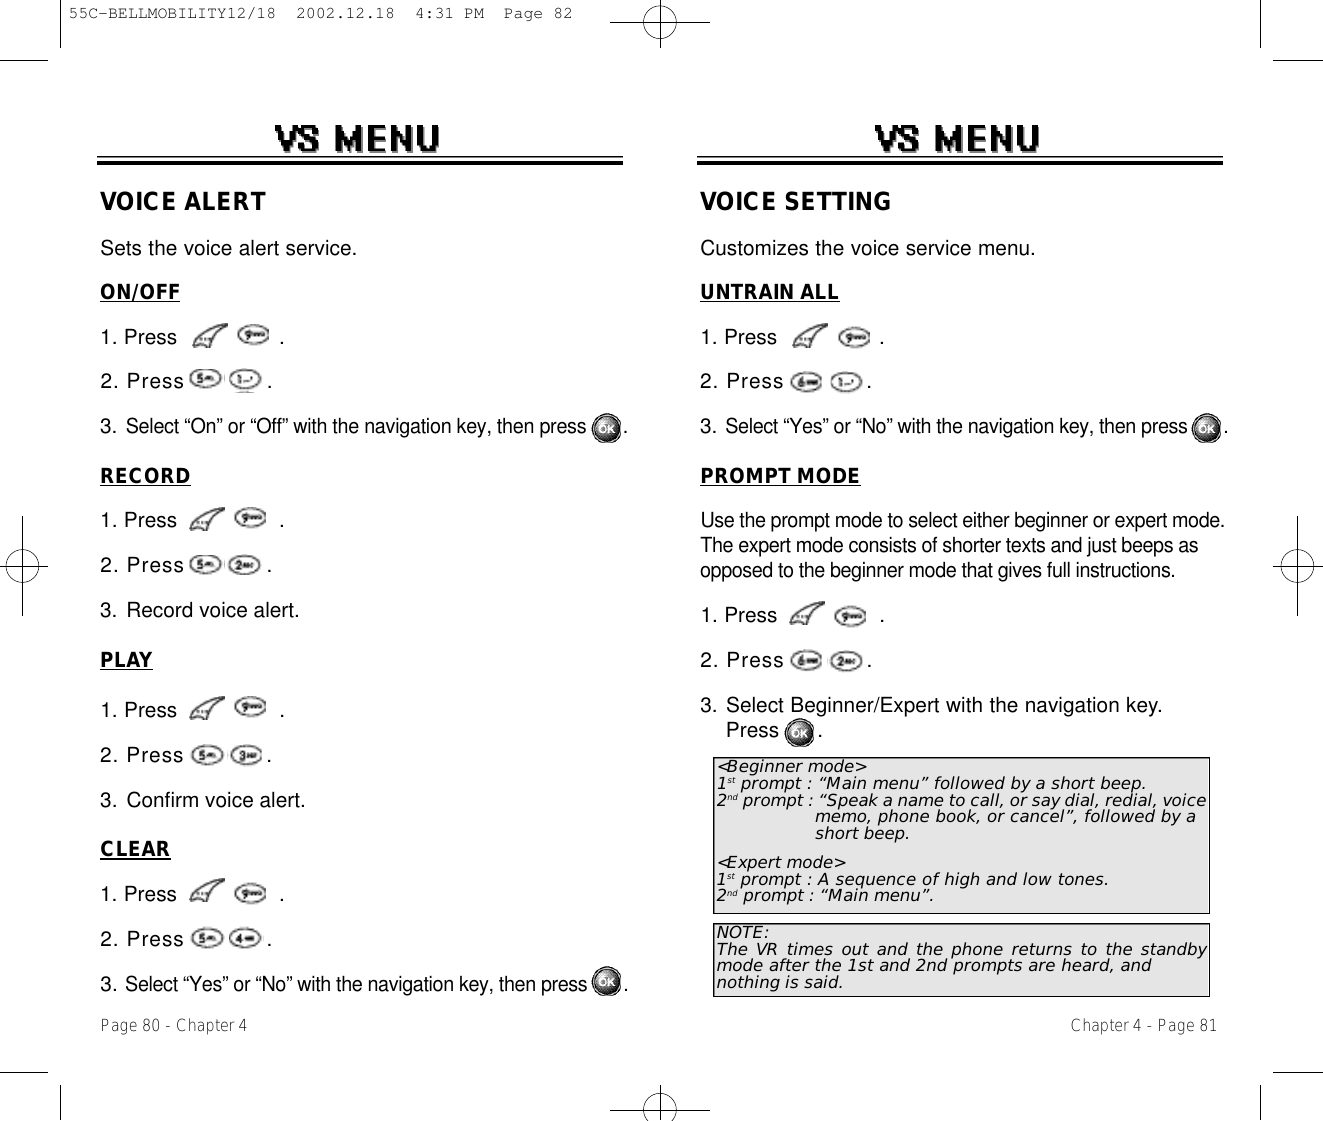 Chapter 4 - Page 81Page 80 - Chapter 4VOICE SETTINGCustomizes the voice service menu.UNTRAIN ALL1. Press                .2. Press            .3. Select “Yes” or “No” with the navigation key, then press       .PROMPT MODEUse the prompt mode to select either beginner or expert mode.The expert mode consists of shorter texts and just beeps asopposed to the beginner mode that gives full instructions.1. Press                .2. Press            .3. Select Beginner/Expert with the navigation key.Press      .&lt;Beginner mode&gt;1st prompt : “Main menu” followed by a short beep.2nd prompt : “Speak a name to call, or say dial, redial, voice memo, phone book, or cancel”, followed by a short beep.&lt;Expert mode&gt;1st prompt : A sequence of high and low tones.2nd prompt : “Main menu”.NOTE:The VR times out and the phone returns to the standbymode after the 1st and 2nd prompts are heard, andnothing is said.VOICE ALERTSets the voice alert service.ON/OFF1. Press                .2. Press            .3. Select “On” or “Off” with the navigation key, then press       .RECORD1. Press                .2. Press            .3. Record voice alert.PLAY1. Press                .2. Press            .3. Confirm voice alert.CLEAR1. Press                .2. Press            .3. Select “Yes” or “No” with the navigation key, then press       .55C-BELLMOBILITY12/18  2002.12.18  4:31 PM  Page 82